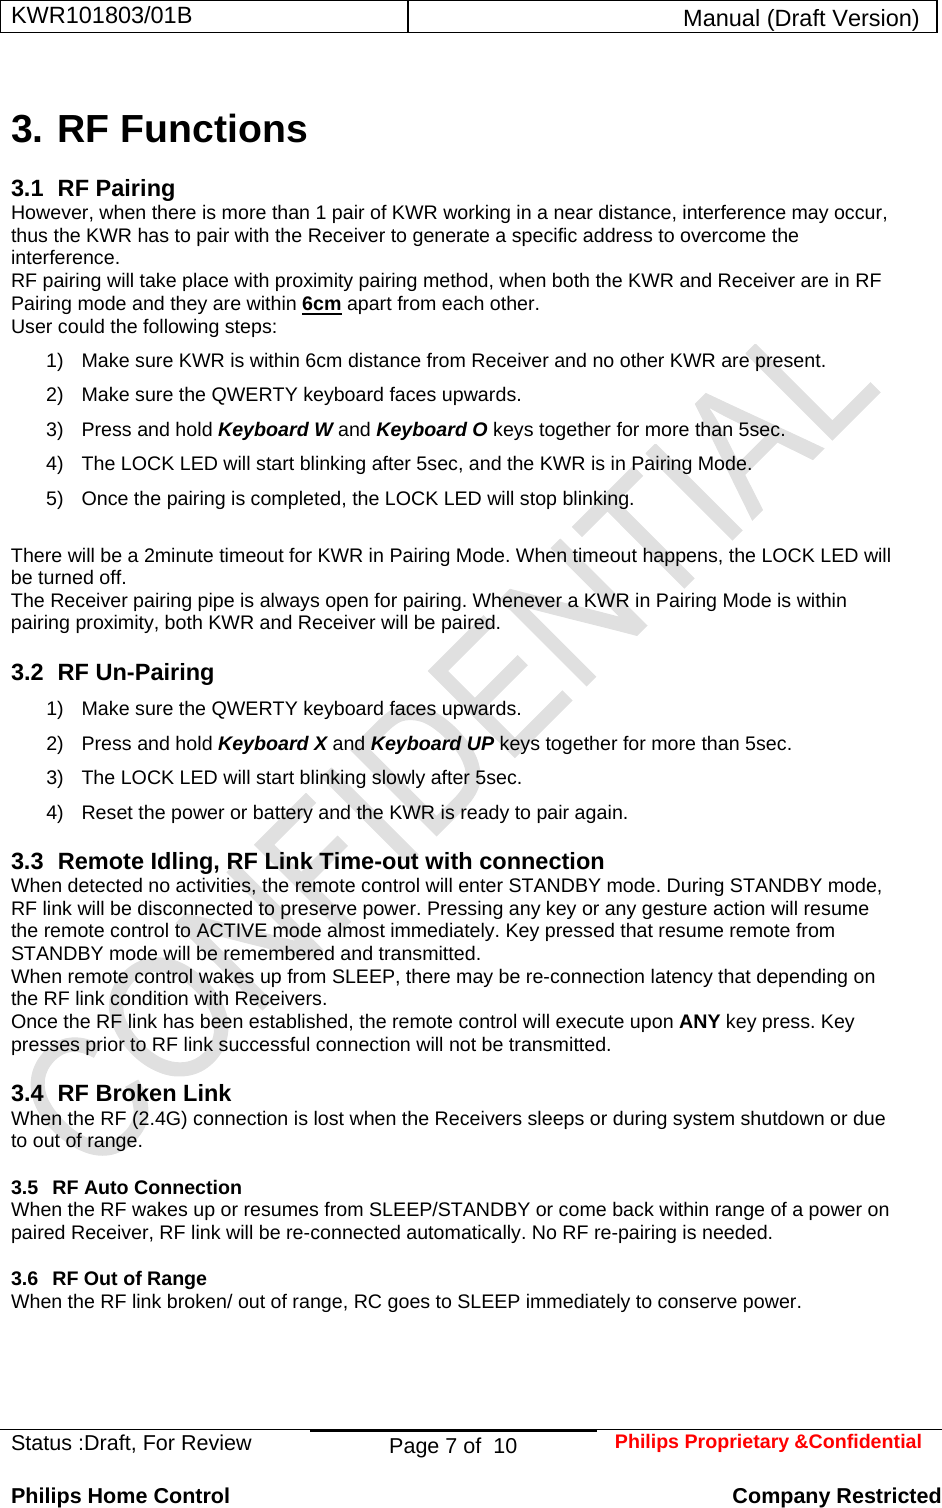 KWR101803/01B  Manual (Draft Version)  Status :Draft, For Review  Page 7 of  10  Philips Proprietary &amp;Confidential  Philips Home Control   Company Restricted 3. RF Functions 3.1 RF Pairing However, when there is more than 1 pair of KWR working in a near distance, interference may occur, thus the KWR has to pair with the Receiver to generate a specific address to overcome the interference. RF pairing will take place with proximity pairing method, when both the KWR and Receiver are in RF Pairing mode and they are within 6cm apart from each other. User could the following steps: 1)  Make sure KWR is within 6cm distance from Receiver and no other KWR are present. 2)  Make sure the QWERTY keyboard faces upwards. 3)  Press and hold Keyboard W and Keyboard O keys together for more than 5sec. 4)  The LOCK LED will start blinking after 5sec, and the KWR is in Pairing Mode. 5)  Once the pairing is completed, the LOCK LED will stop blinking.  There will be a 2minute timeout for KWR in Pairing Mode. When timeout happens, the LOCK LED will be turned off. The Receiver pairing pipe is always open for pairing. Whenever a KWR in Pairing Mode is within pairing proximity, both KWR and Receiver will be paired. 3.2 RF Un-Pairing 1)  Make sure the QWERTY keyboard faces upwards. 2)  Press and hold Keyboard X and Keyboard UP keys together for more than 5sec. 3)  The LOCK LED will start blinking slowly after 5sec. 4)  Reset the power or battery and the KWR is ready to pair again. 3.3  Remote Idling, RF Link Time-out with connection When detected no activities, the remote control will enter STANDBY mode. During STANDBY mode, RF link will be disconnected to preserve power. Pressing any key or any gesture action will resume the remote control to ACTIVE mode almost immediately. Key pressed that resume remote from STANDBY mode will be remembered and transmitted. When remote control wakes up from SLEEP, there may be re-connection latency that depending on the RF link condition with Receivers. Once the RF link has been established, the remote control will execute upon ANY key press. Key presses prior to RF link successful connection will not be transmitted. 3.4  RF Broken Link  When the RF (2.4G) connection is lost when the Receivers sleeps or during system shutdown or due to out of range. 3.5  RF Auto Connection When the RF wakes up or resumes from SLEEP/STANDBY or come back within range of a power on paired Receiver, RF link will be re-connected automatically. No RF re-pairing is needed. 3.6  RF Out of Range When the RF link broken/ out of range, RC goes to SLEEP immediately to conserve power.    